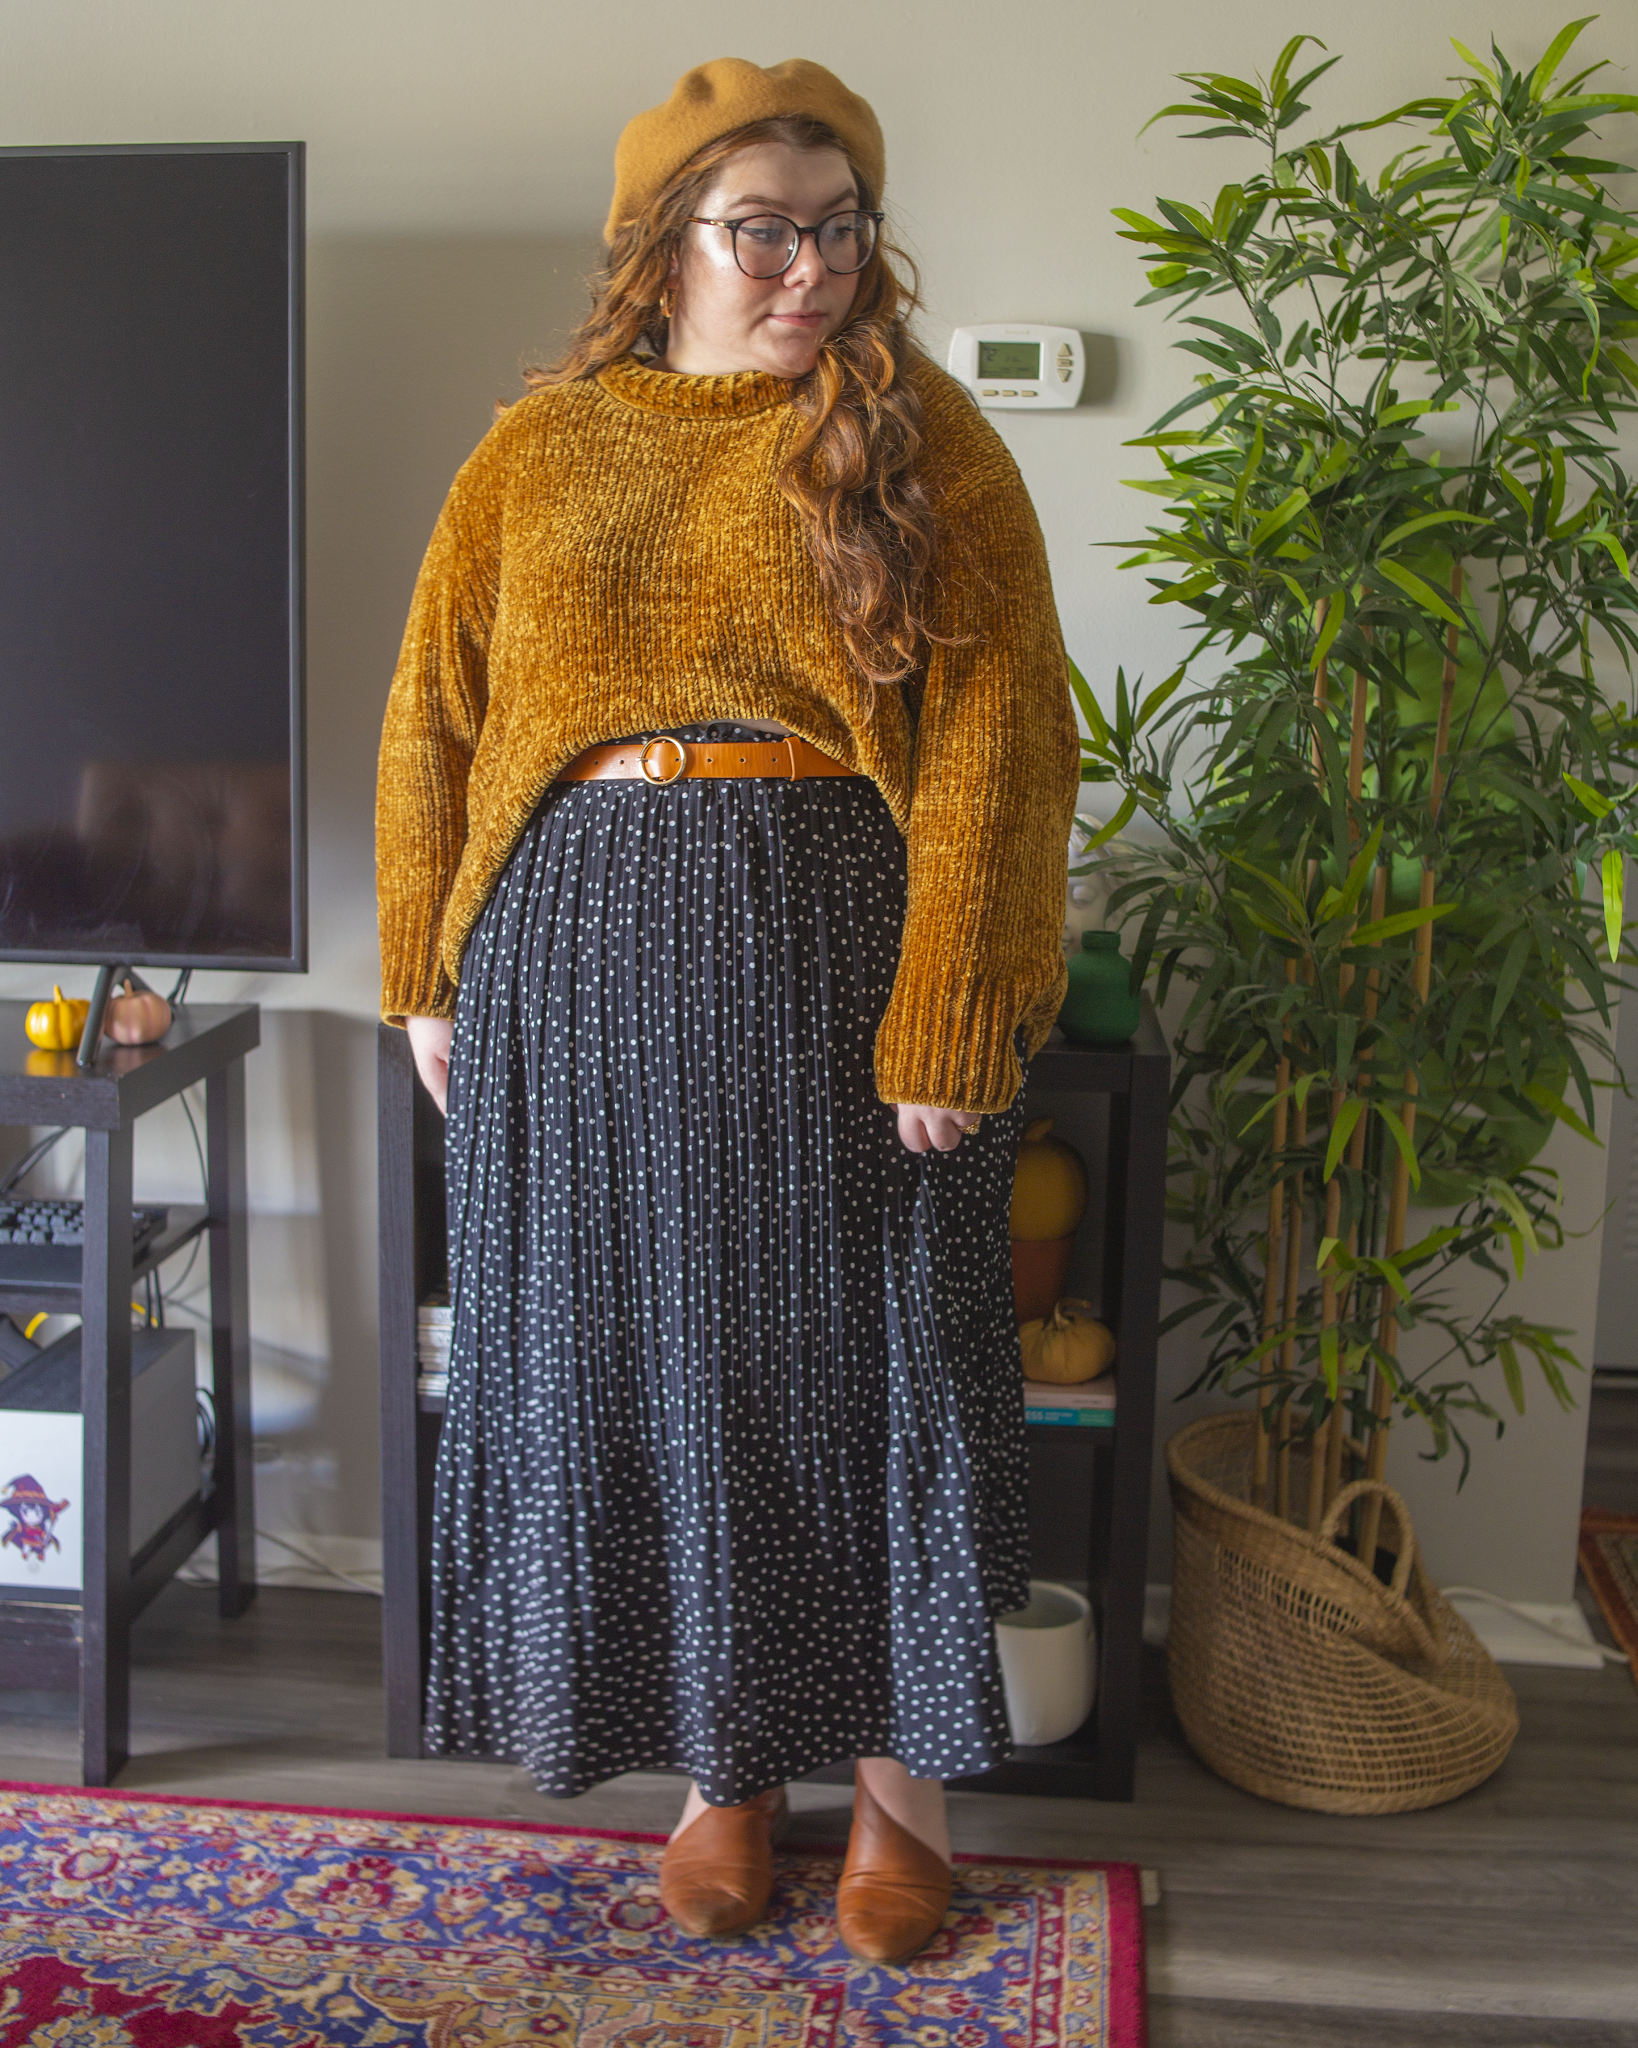 An outfit consisting of a yellow chenille sweater half tucked into a white on black micro swiss dot midi skirt and black Chelsea boots.